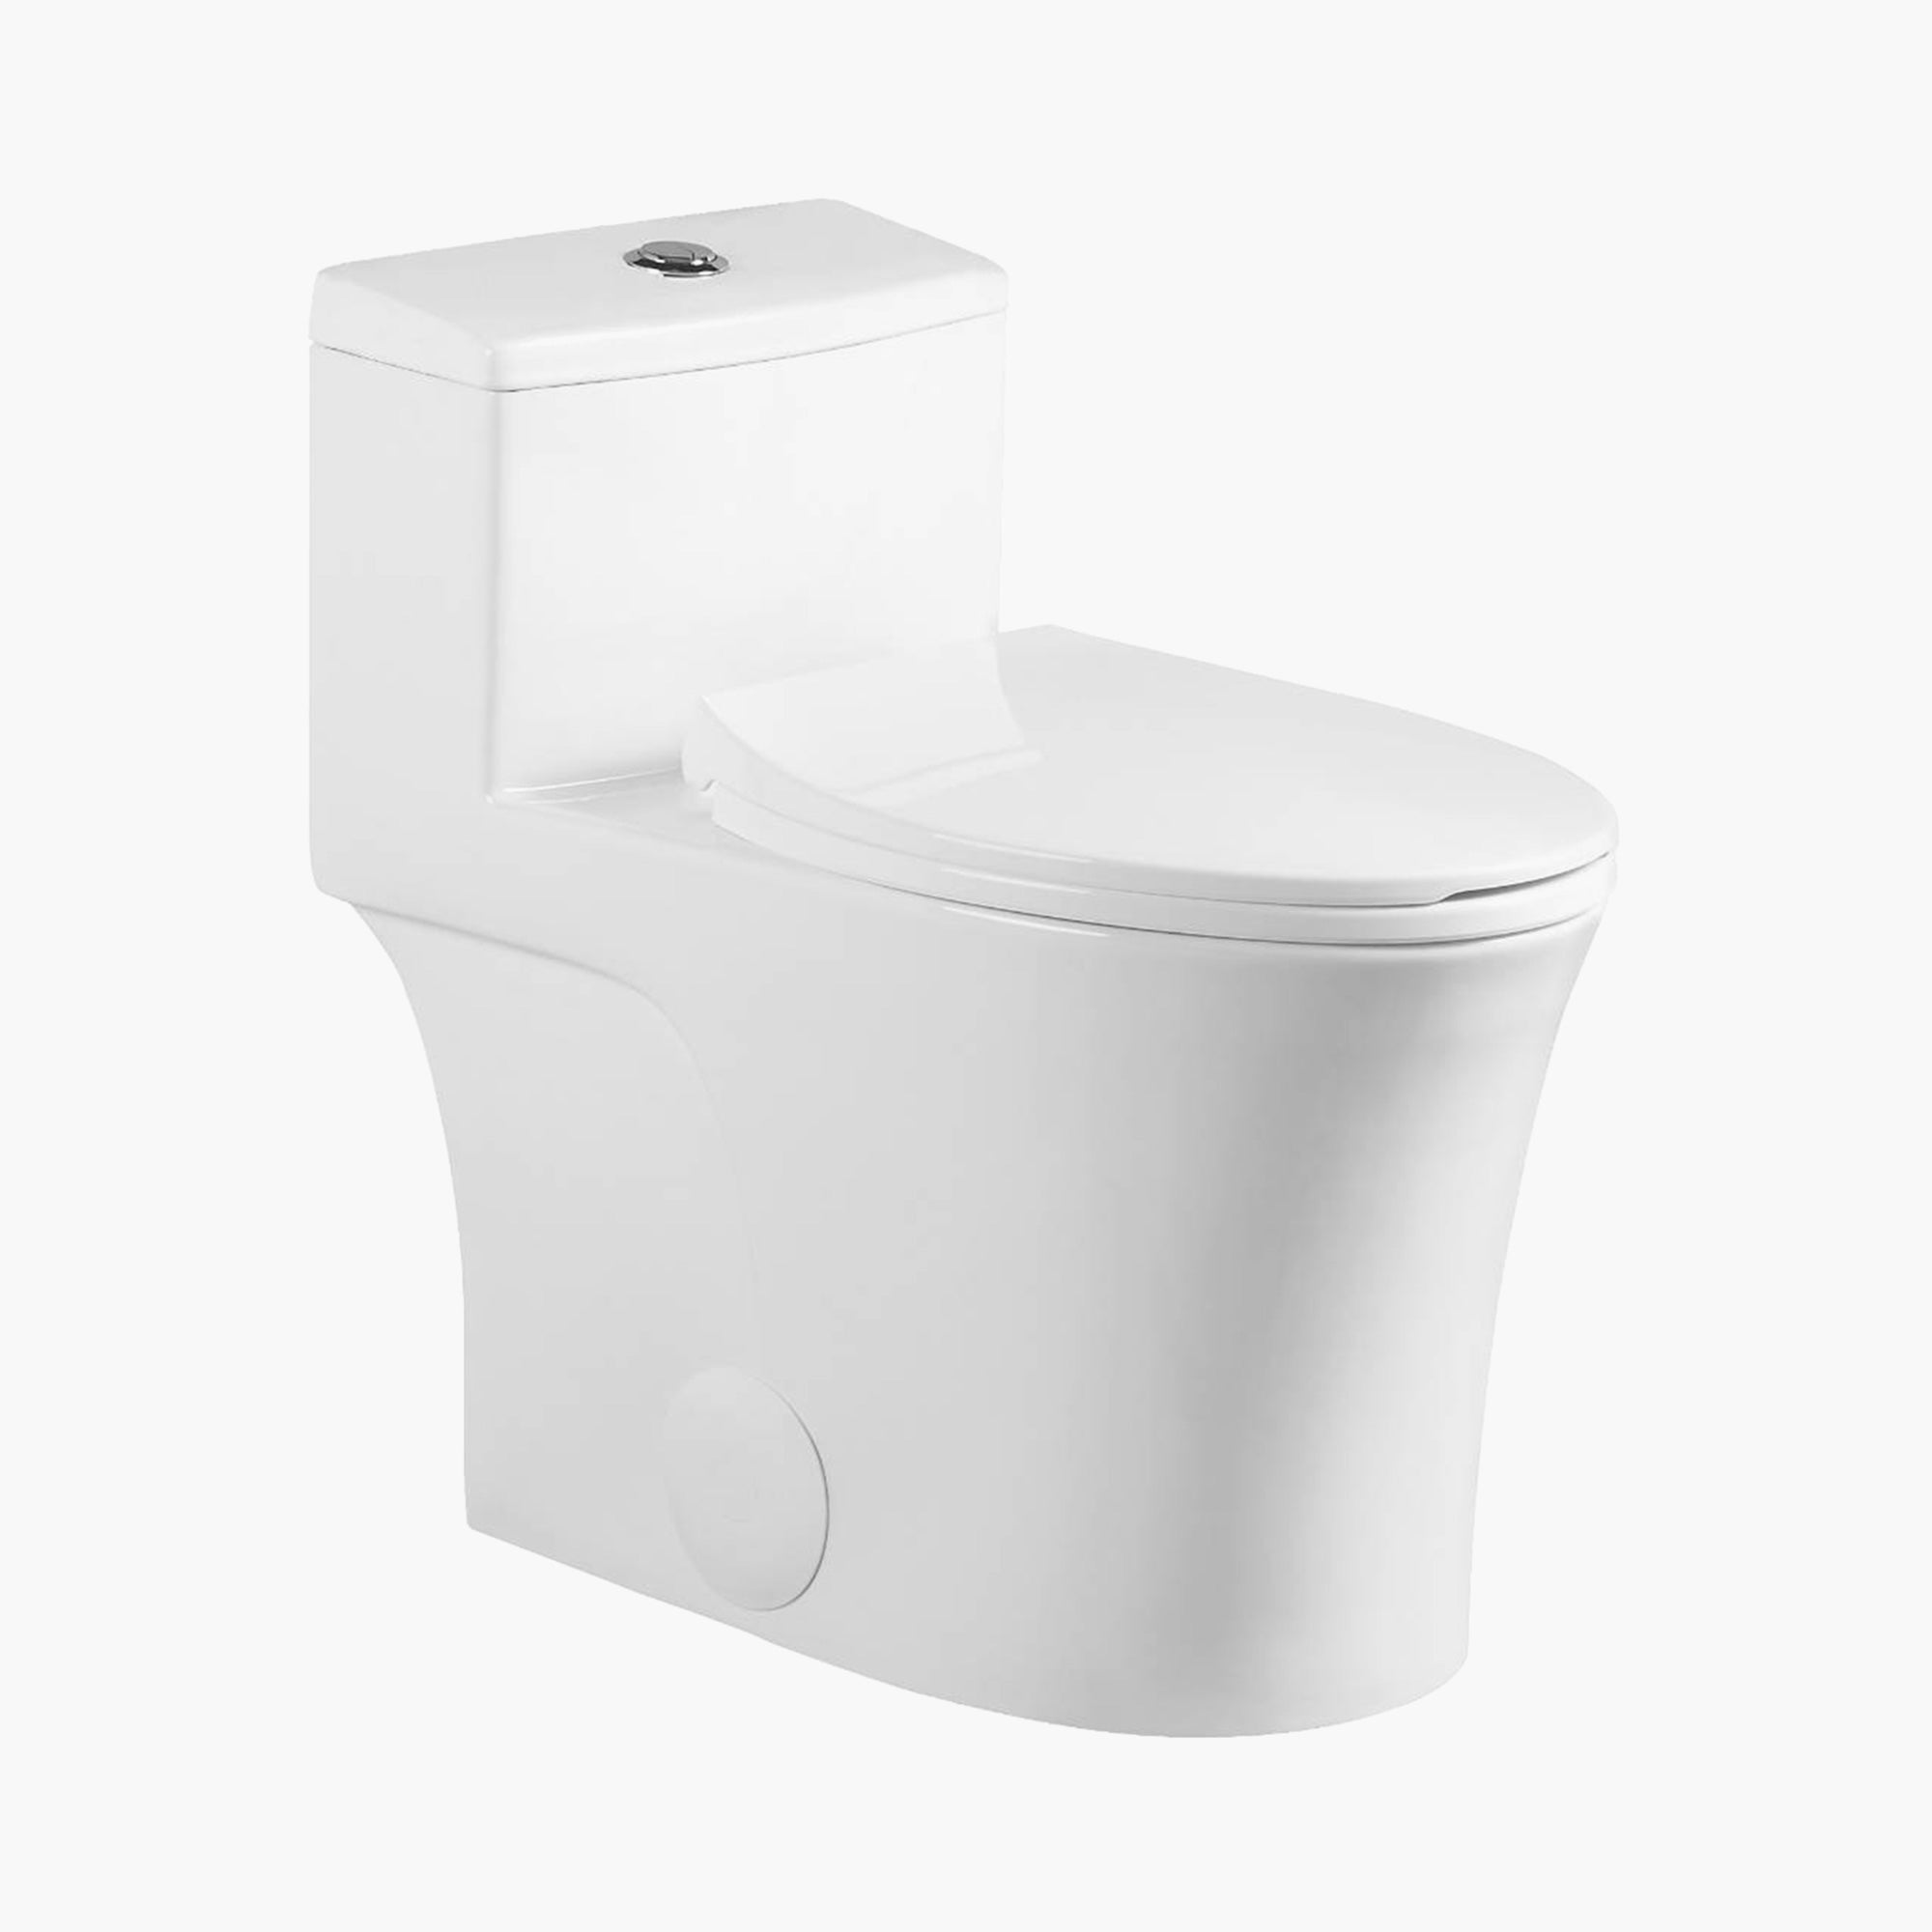 HOROW 10 Inch Rough Toilet Bowl Elongated One Piece Toilet Model T0338W-10